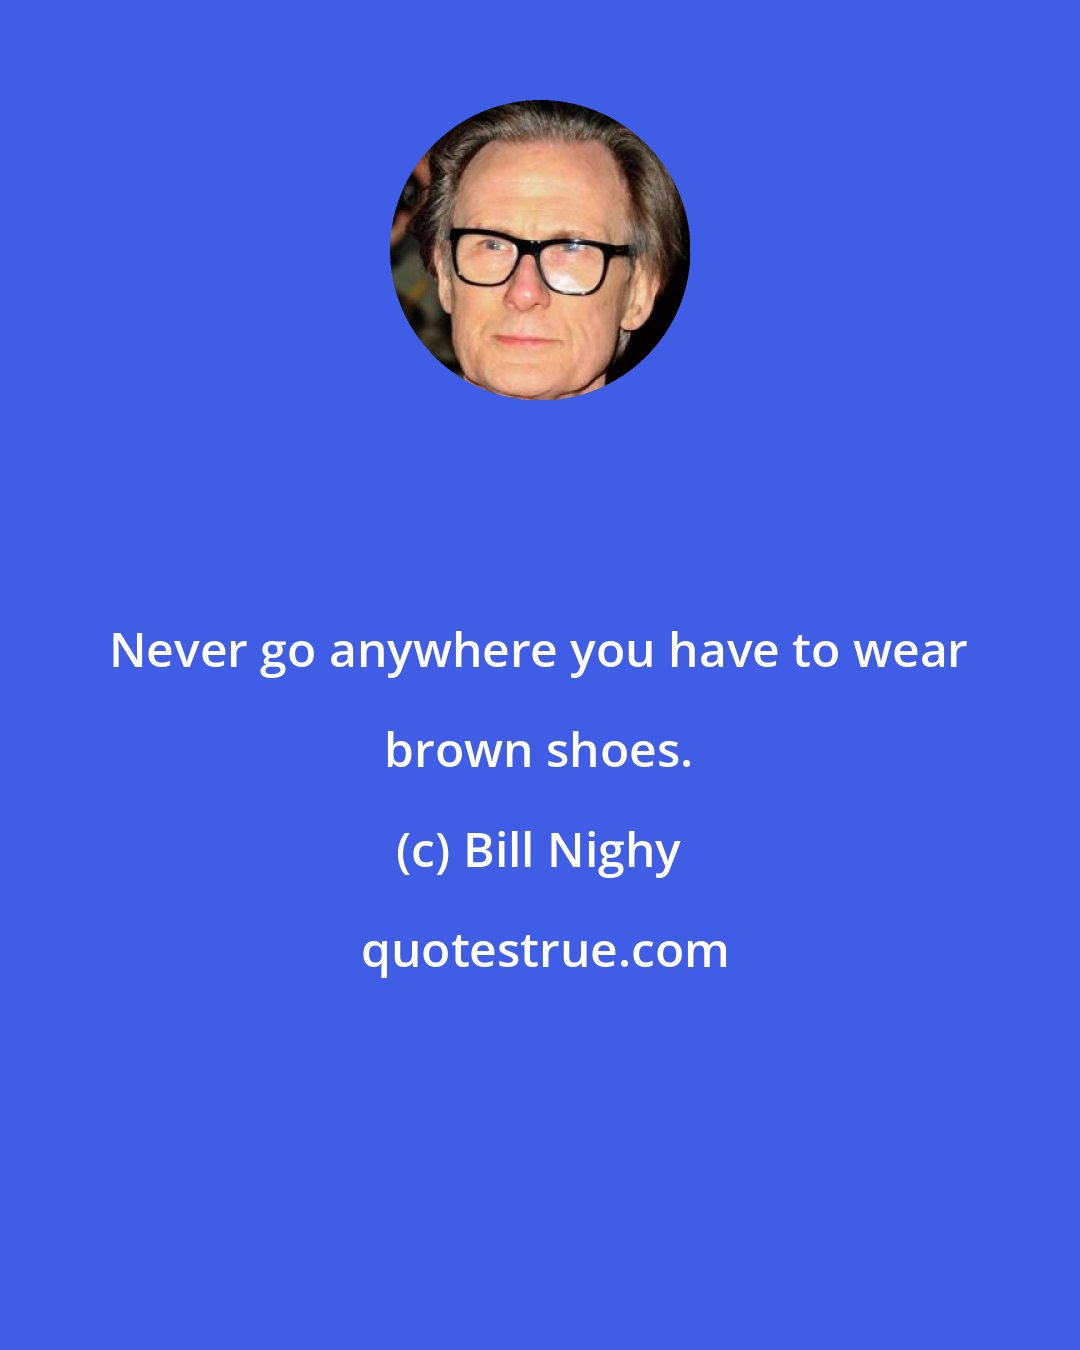 Bill Nighy: Never go anywhere you have to wear brown shoes.